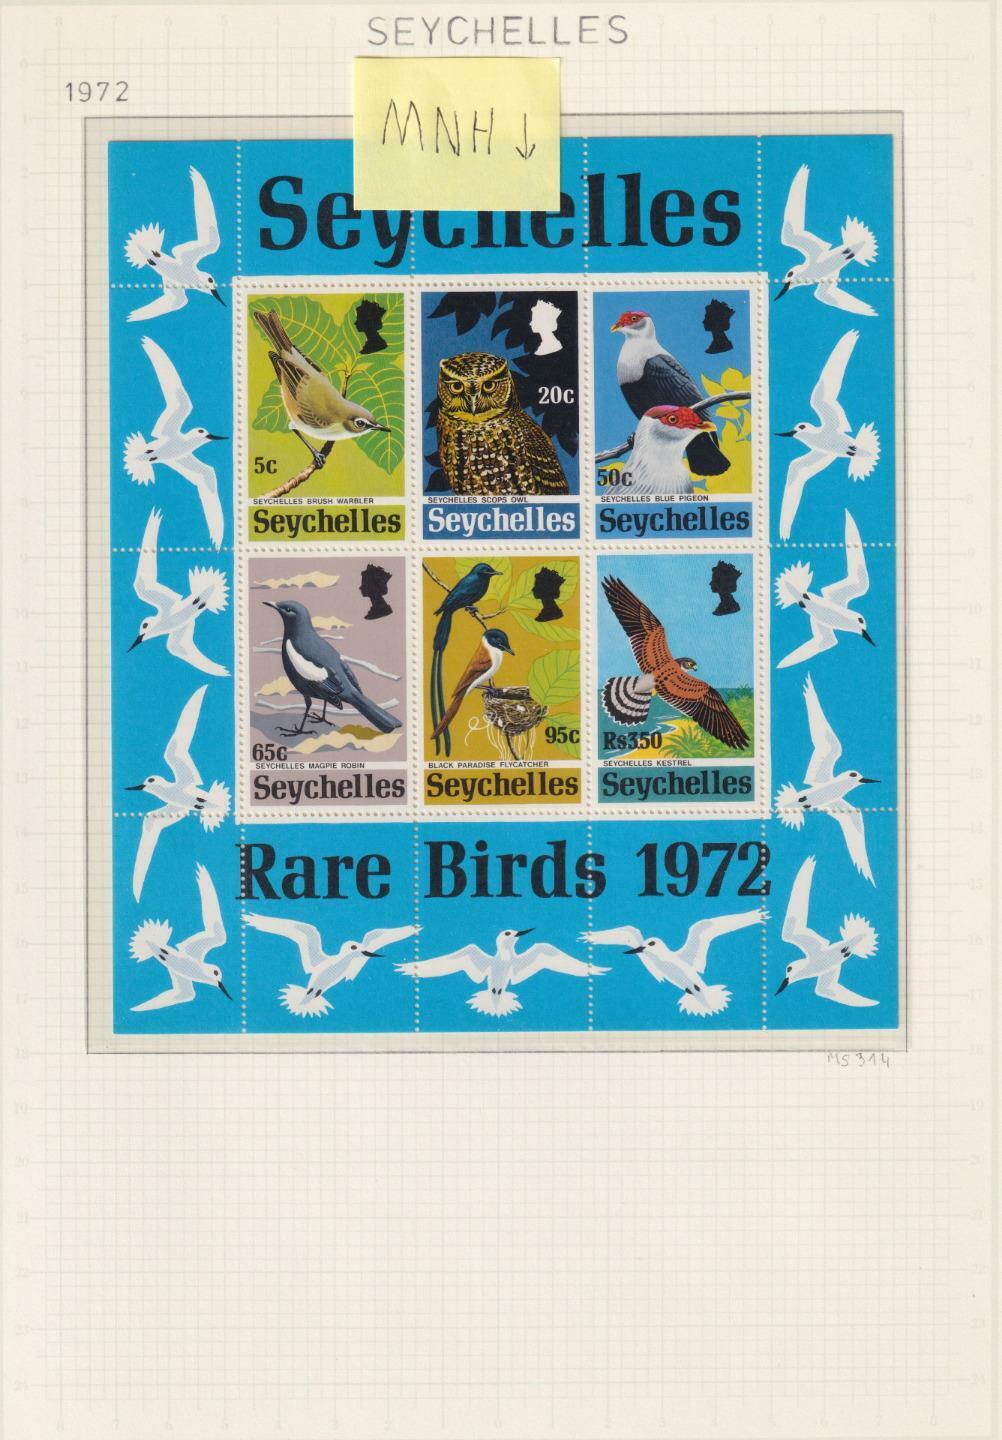 SEYCHELLES - EXCELLENT MNH ** AND MINT HINGED * COLLECTION ON ALBUM PAGES - Z967